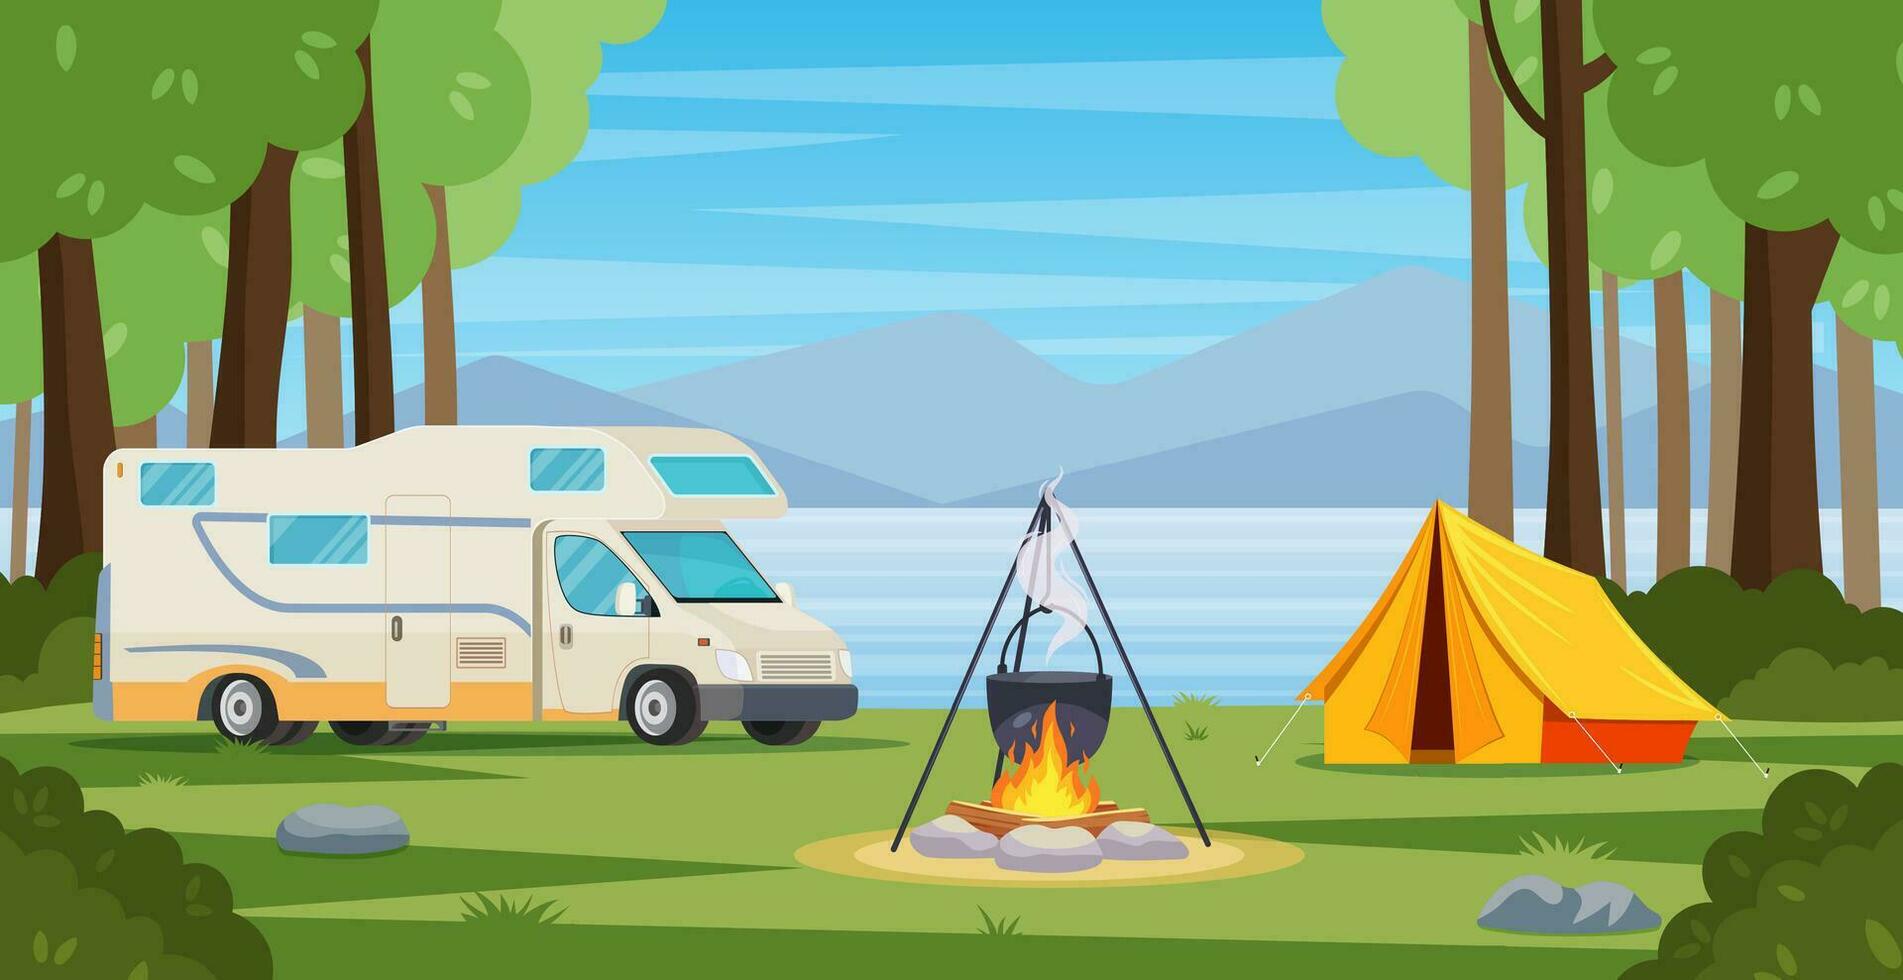 Summer camp in forest with bonfire, tent, van,backpack. cartoon landscape with mountain, forest and campsite. Equipment for travel, hiking. Vector illustration in flat style